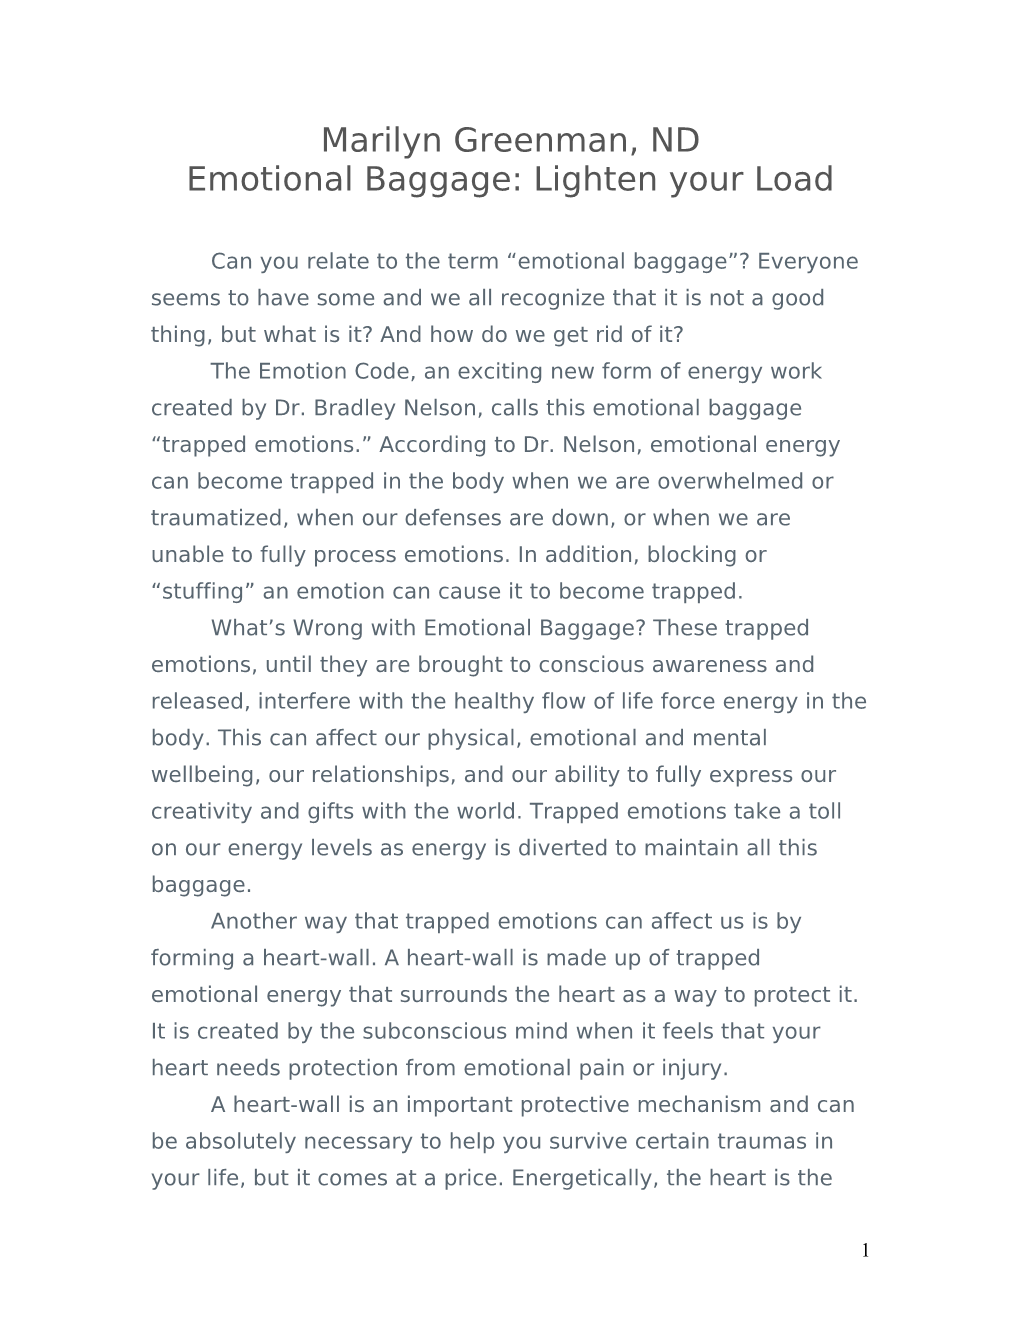 Emotional Baggage: Lighten Your Load with the Emotion Code